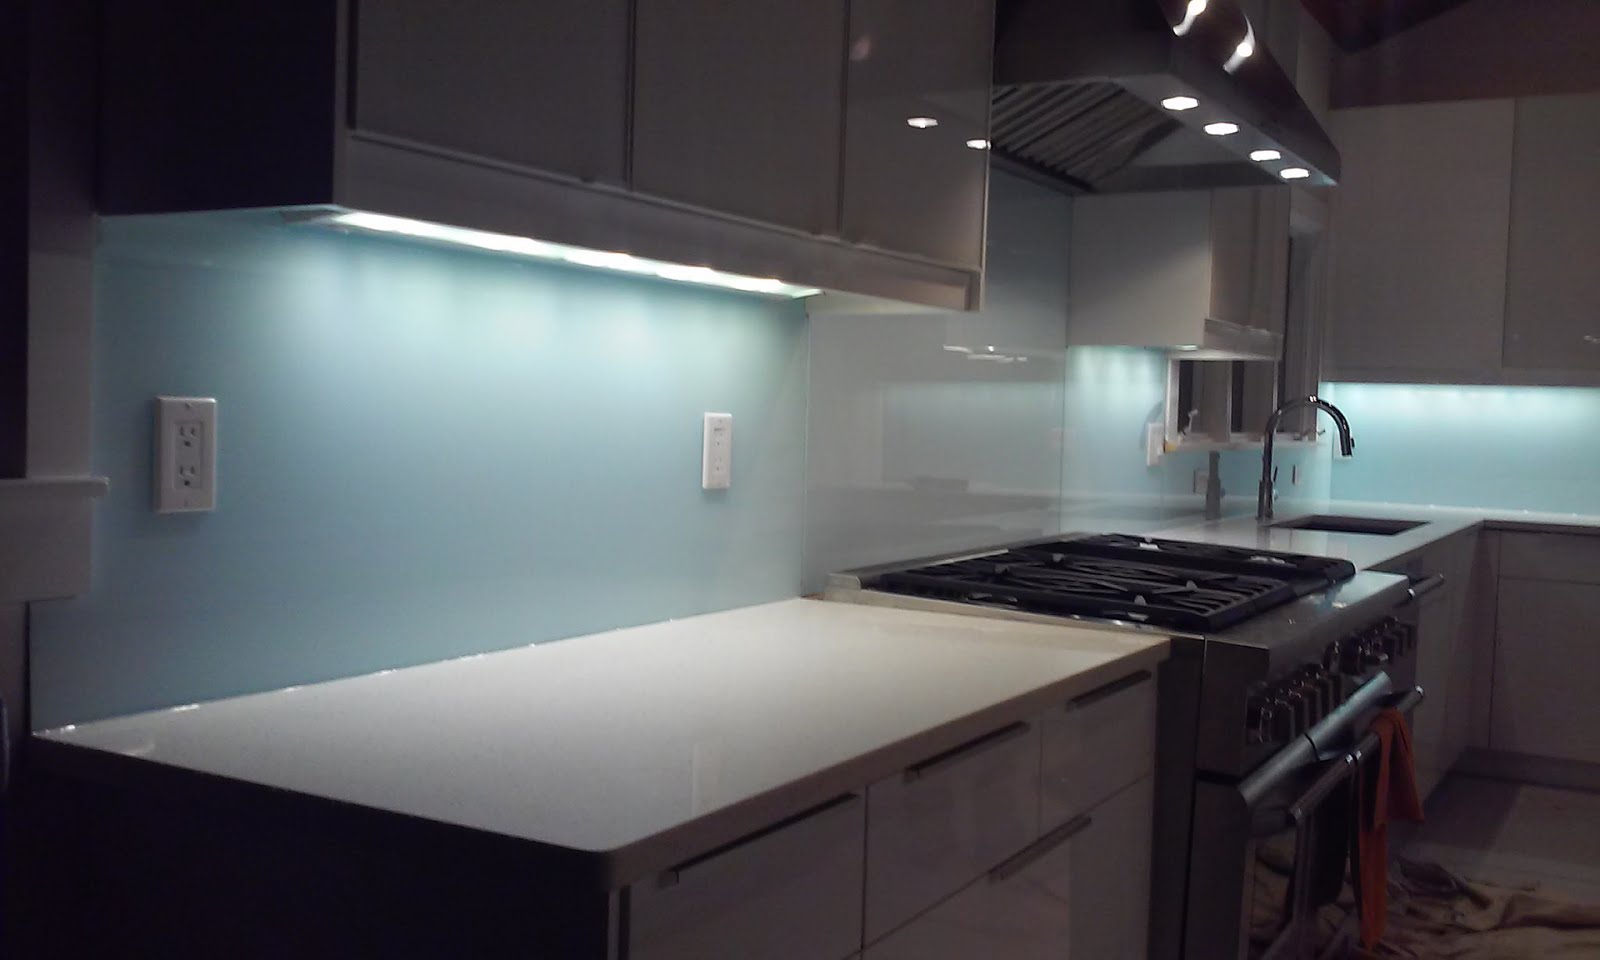 Give your kitchen a new feeling, with our Kitchen Backsplash